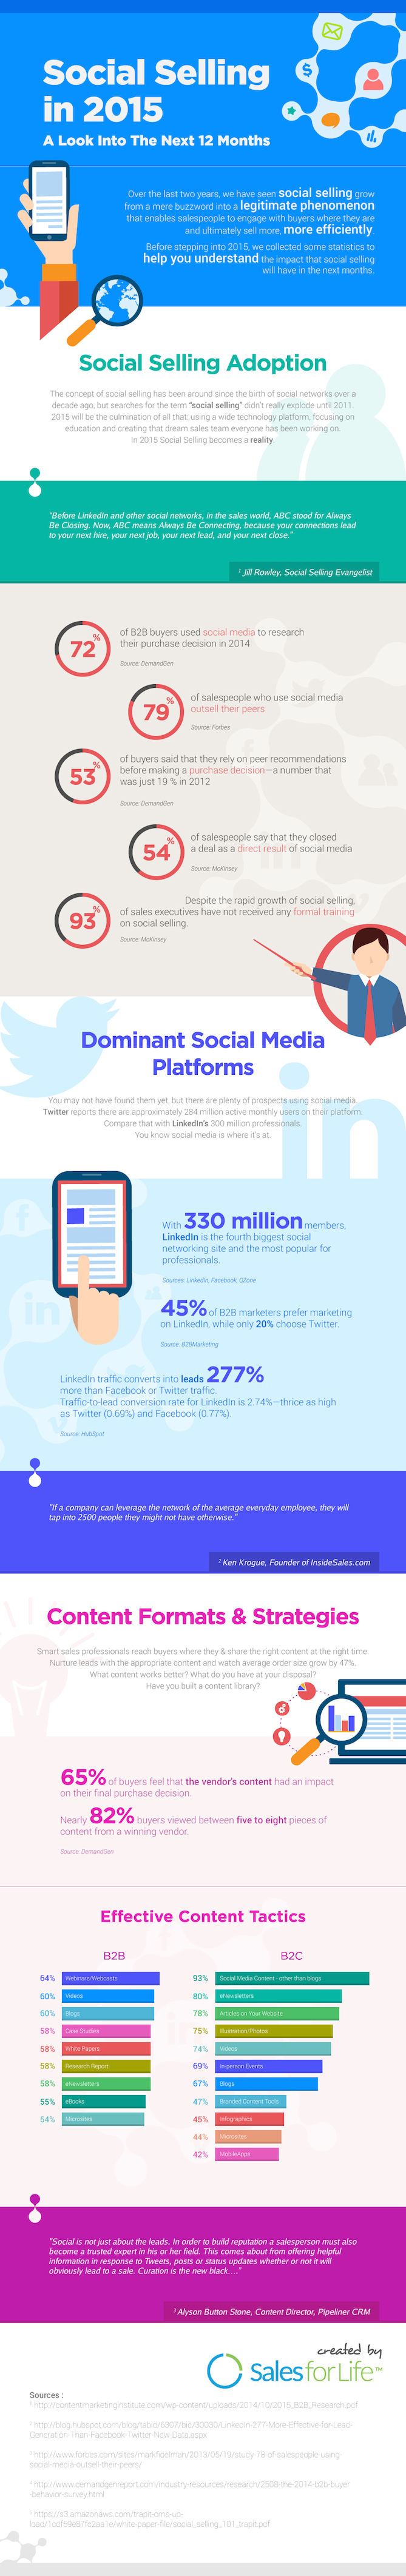 social-selling-2015-infographic